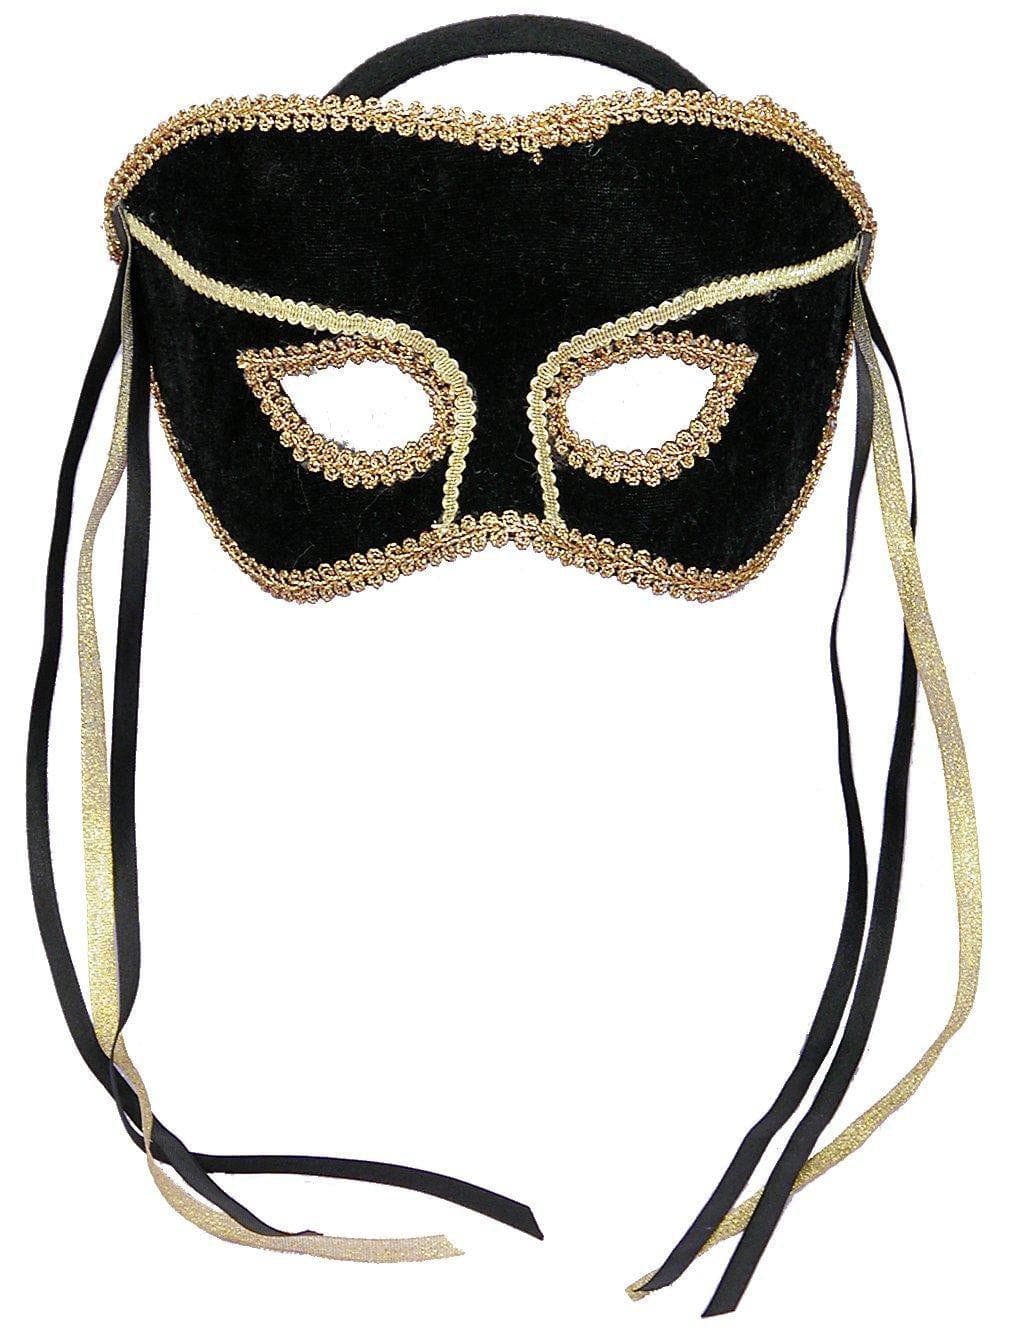 Adult Black and Gold Eye Mask - costumes.com